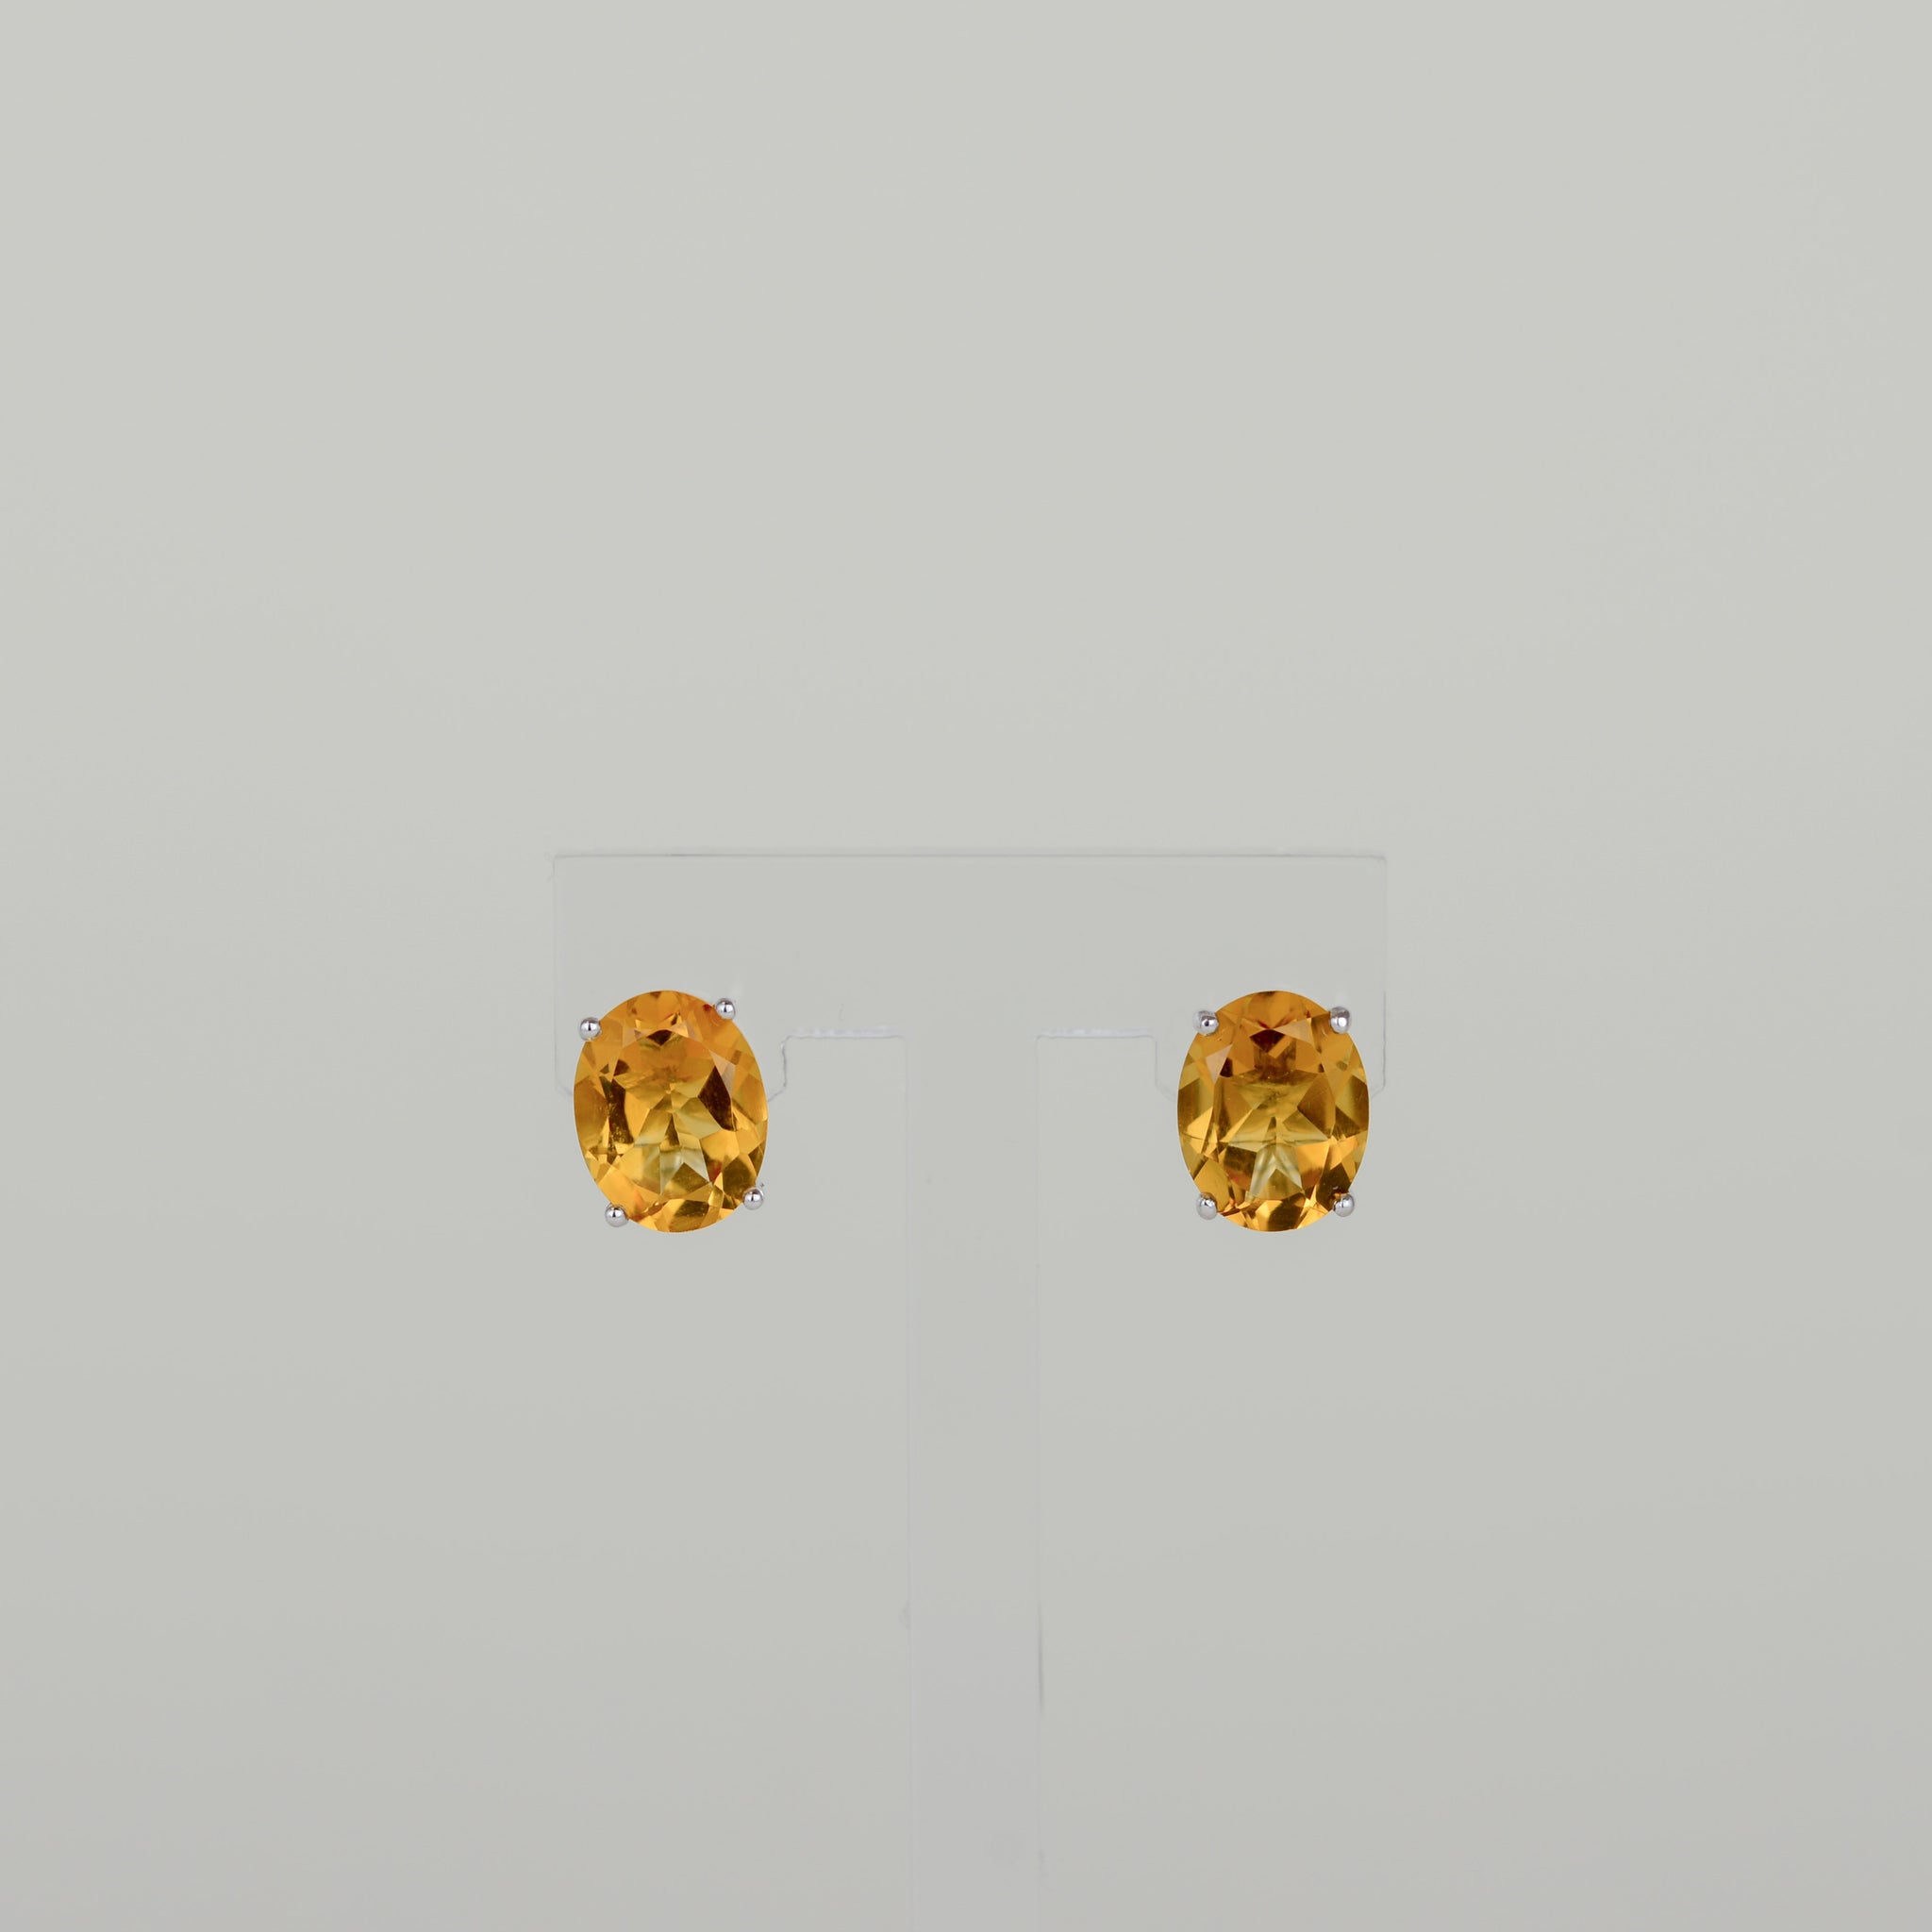 9ct White Gold 4.53ct Oval Citrine Earrings